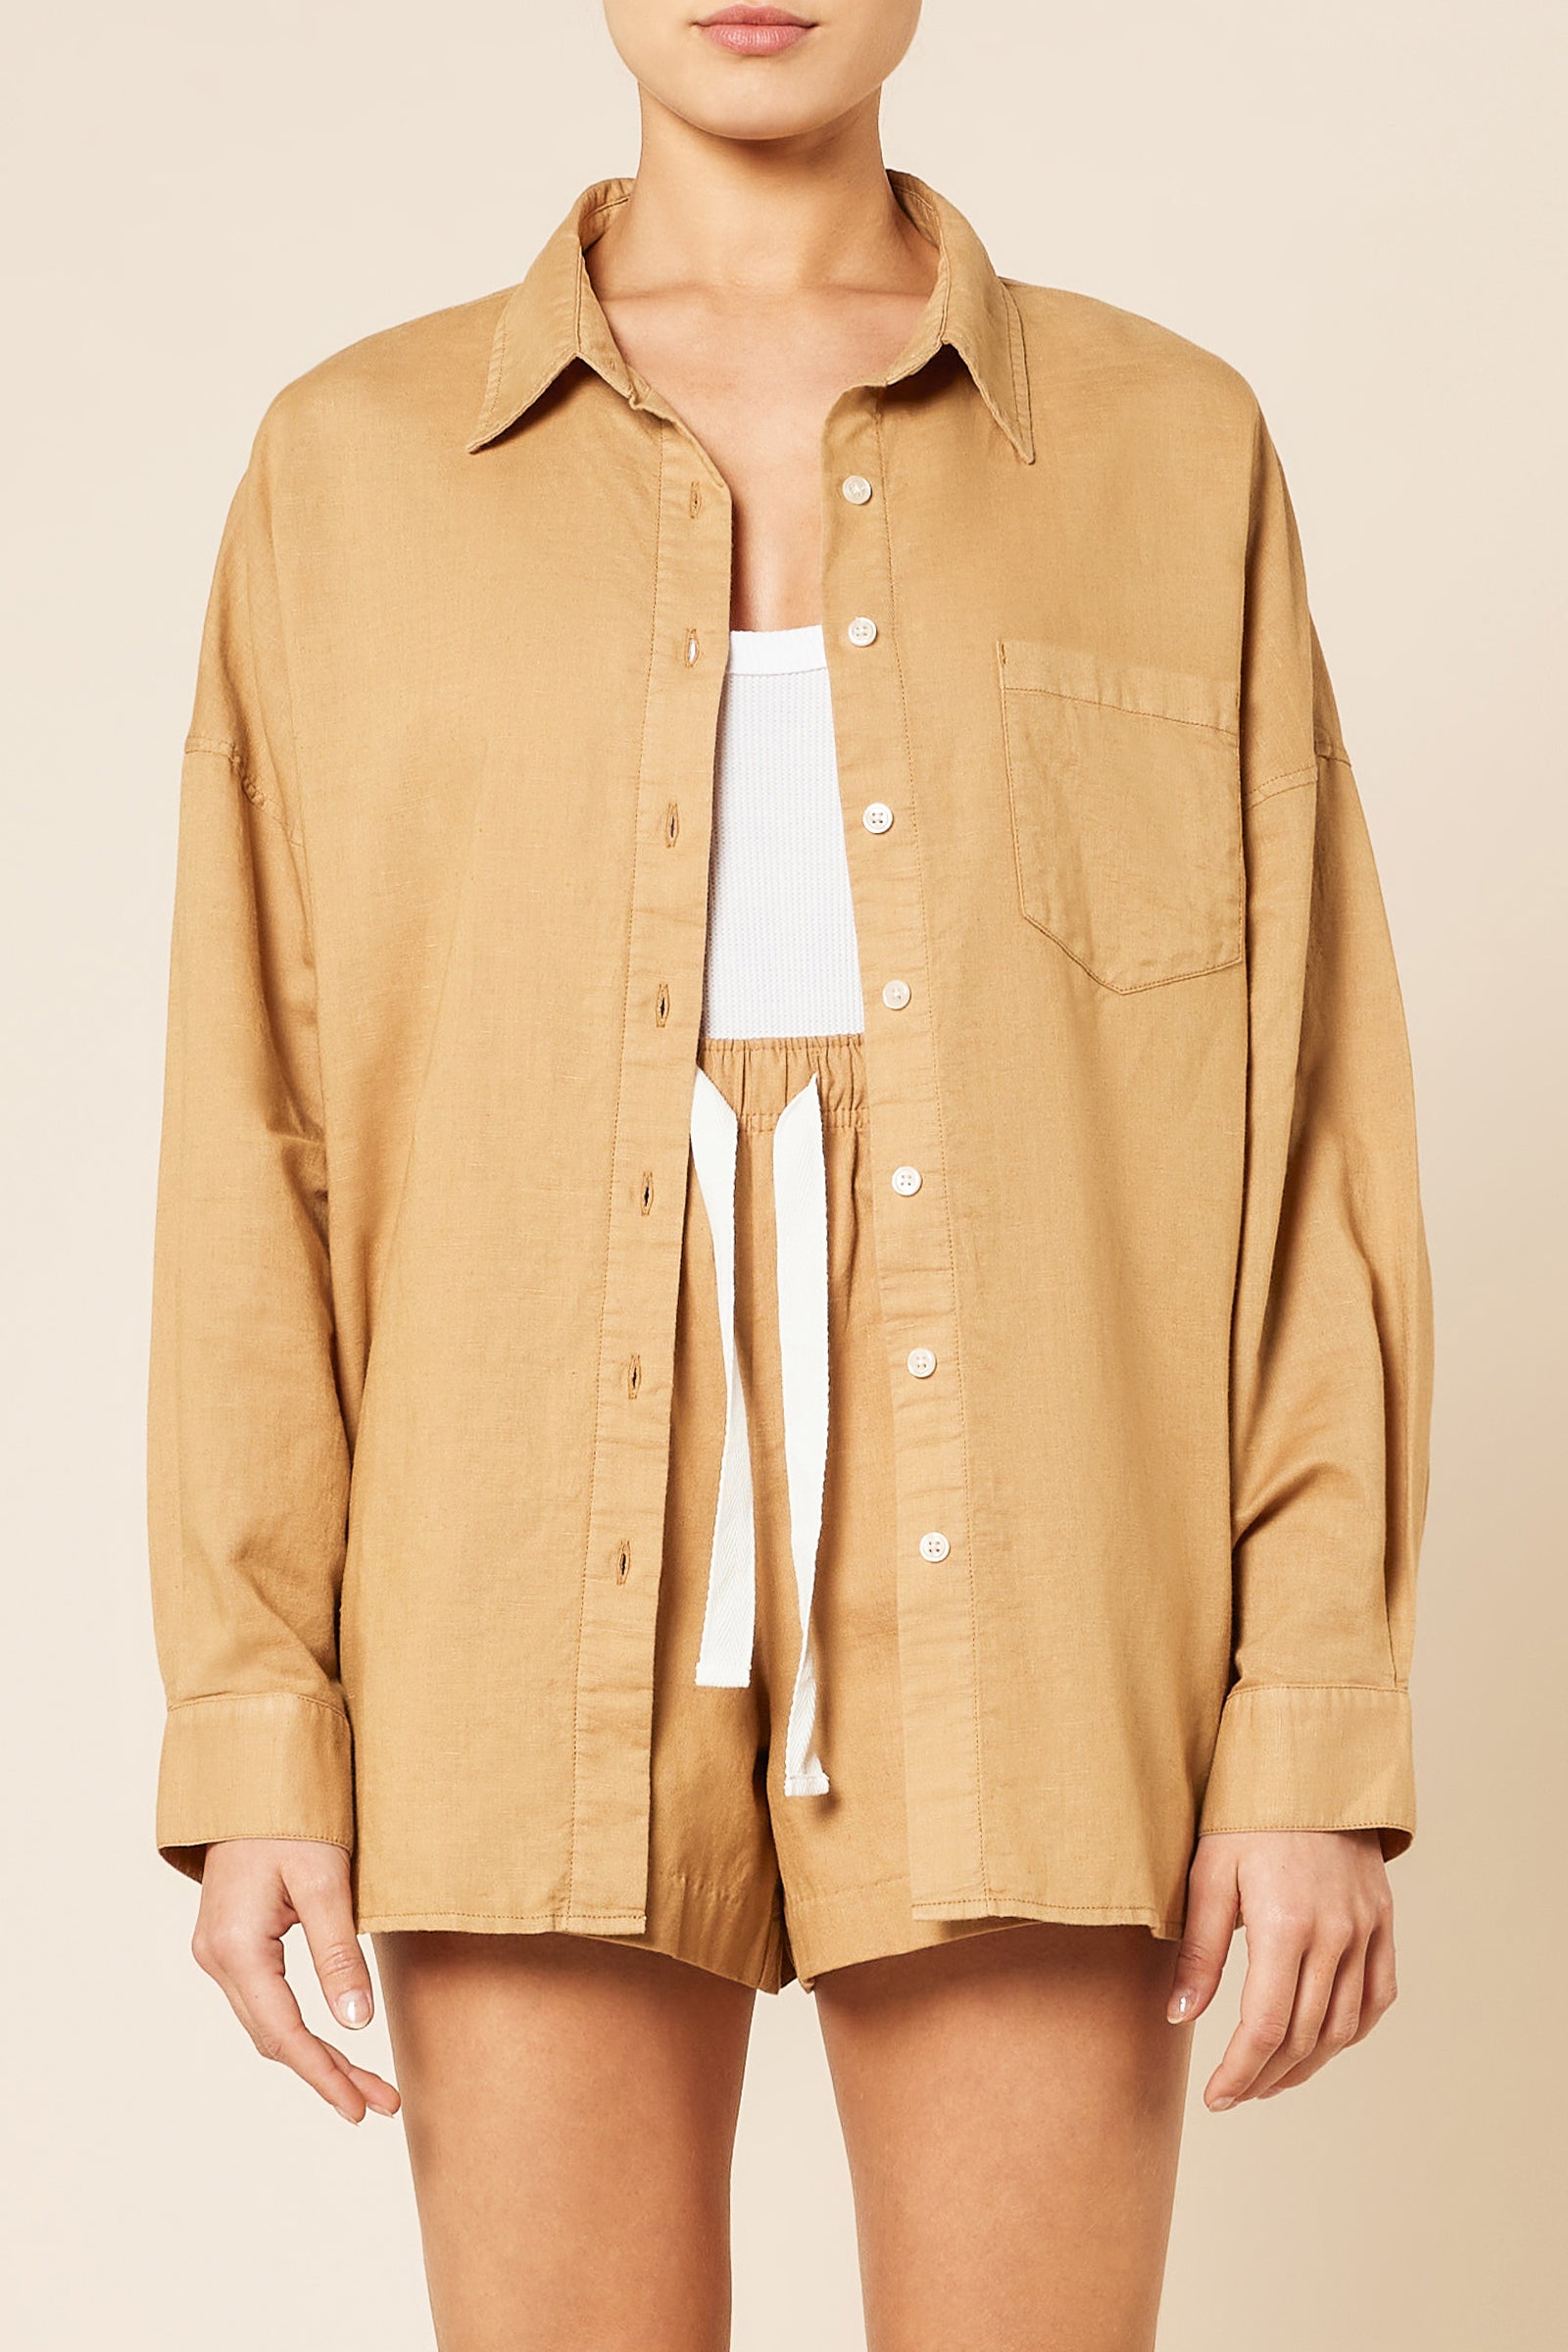 Nude Lucy Leigh Linen Shirt In a Brown Oak Colour